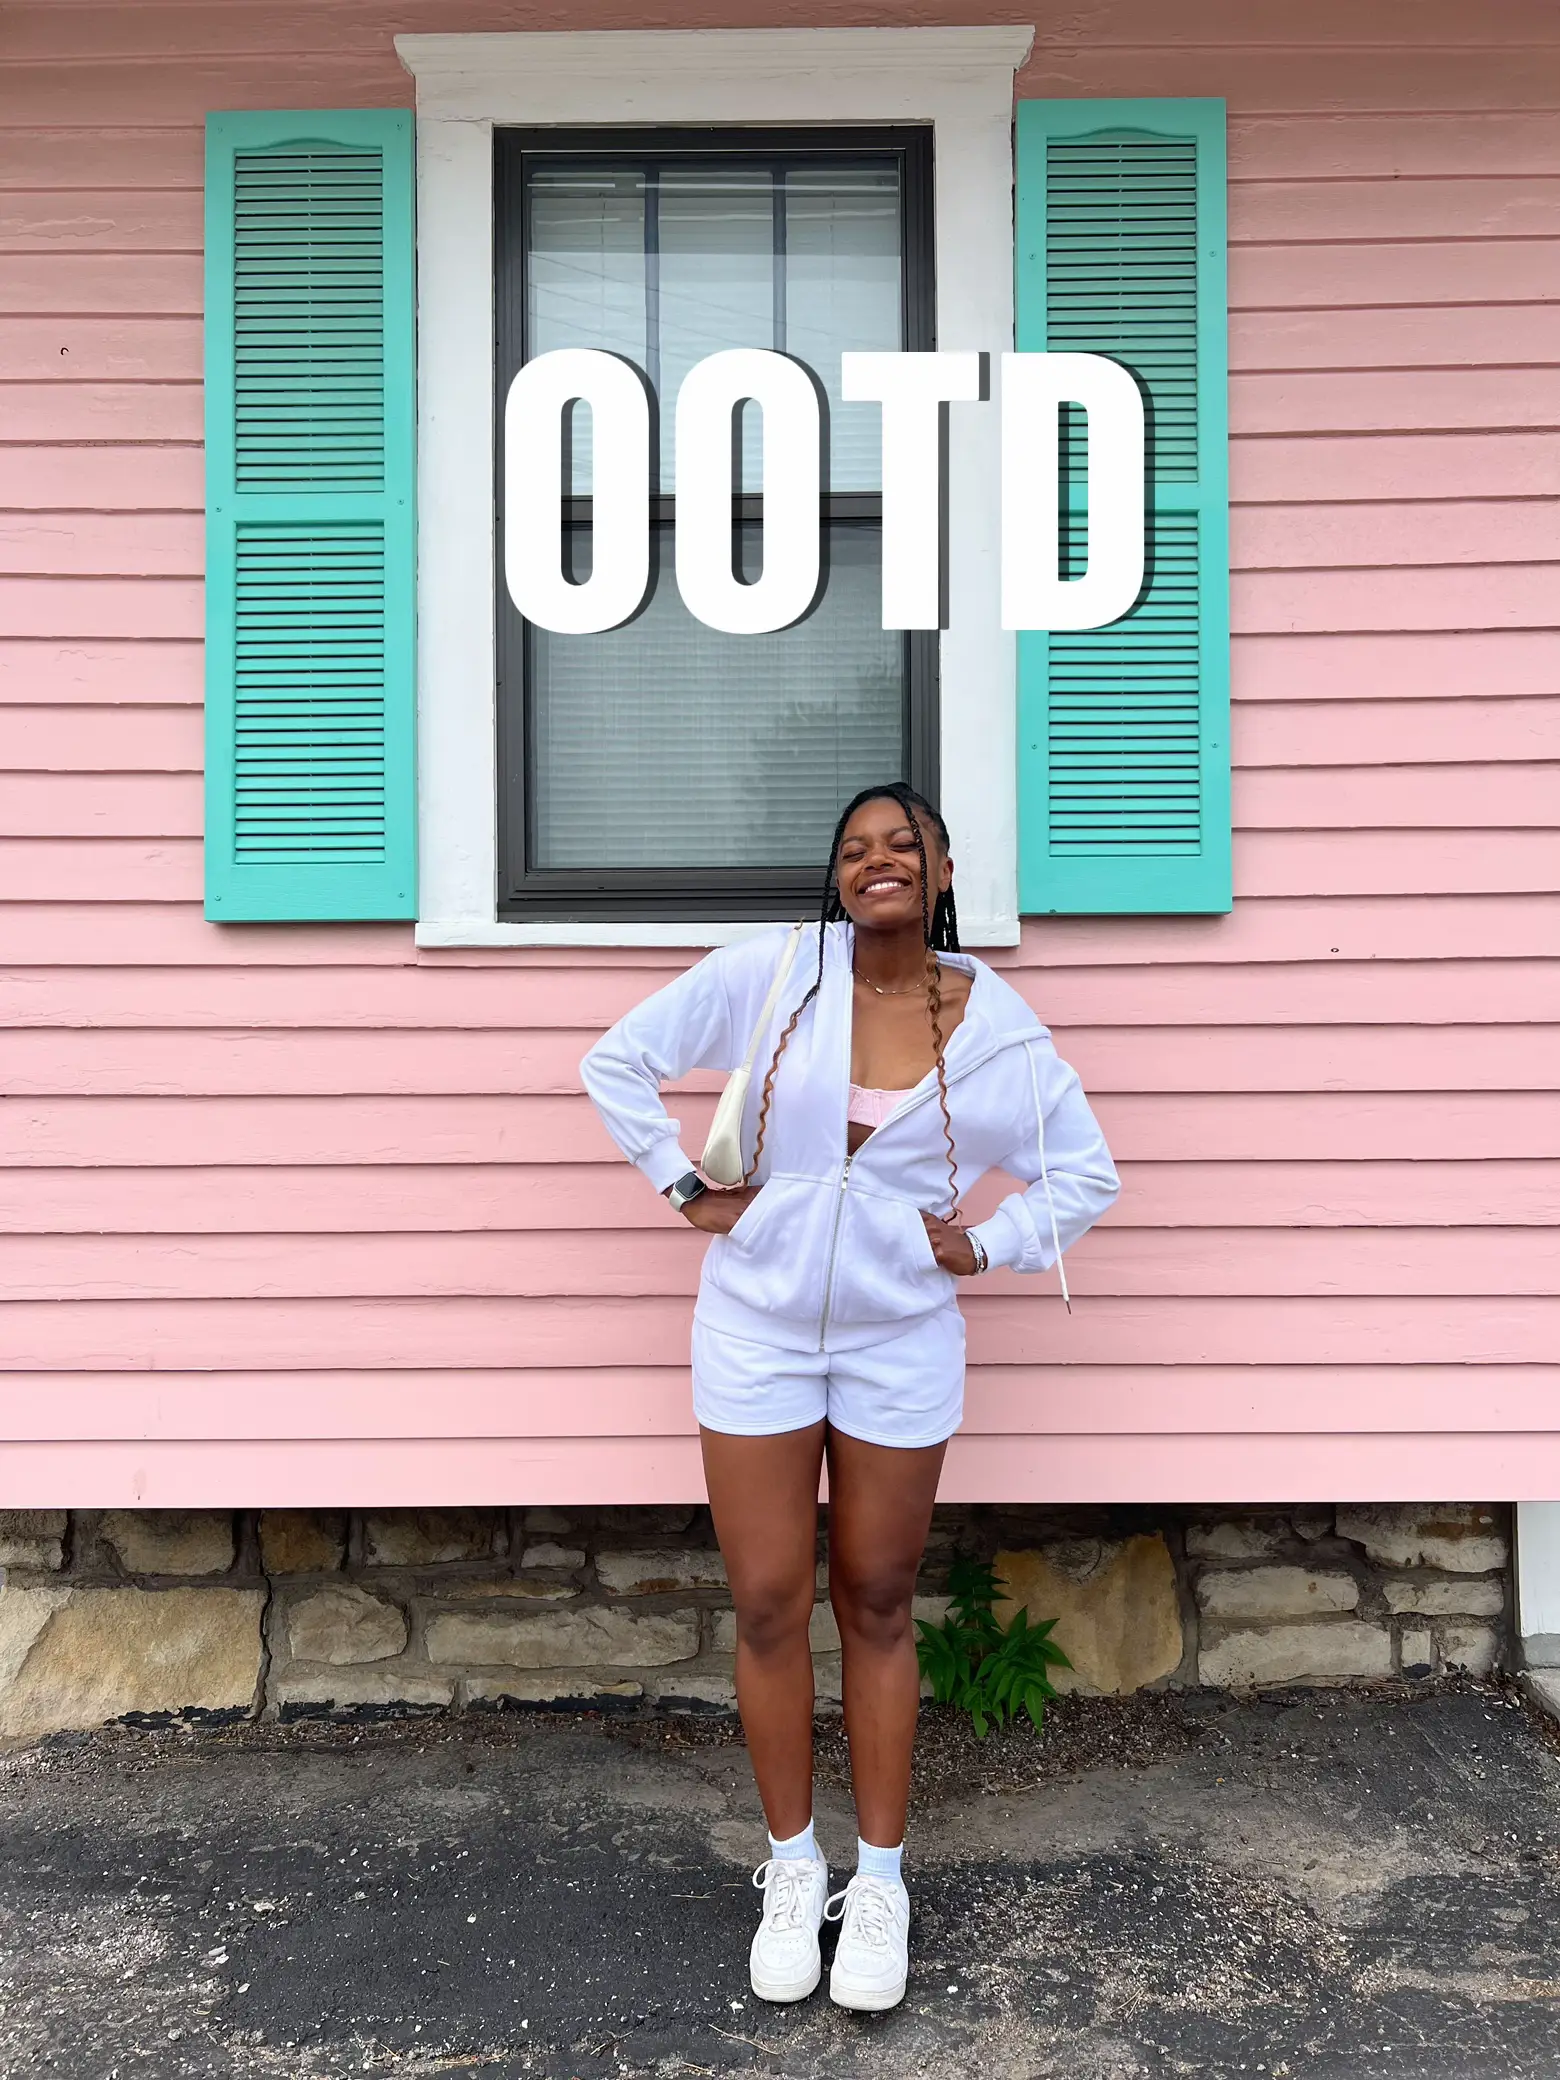 OOTD/Outfit of the Day✨, Gallery posted by Maya Cofield